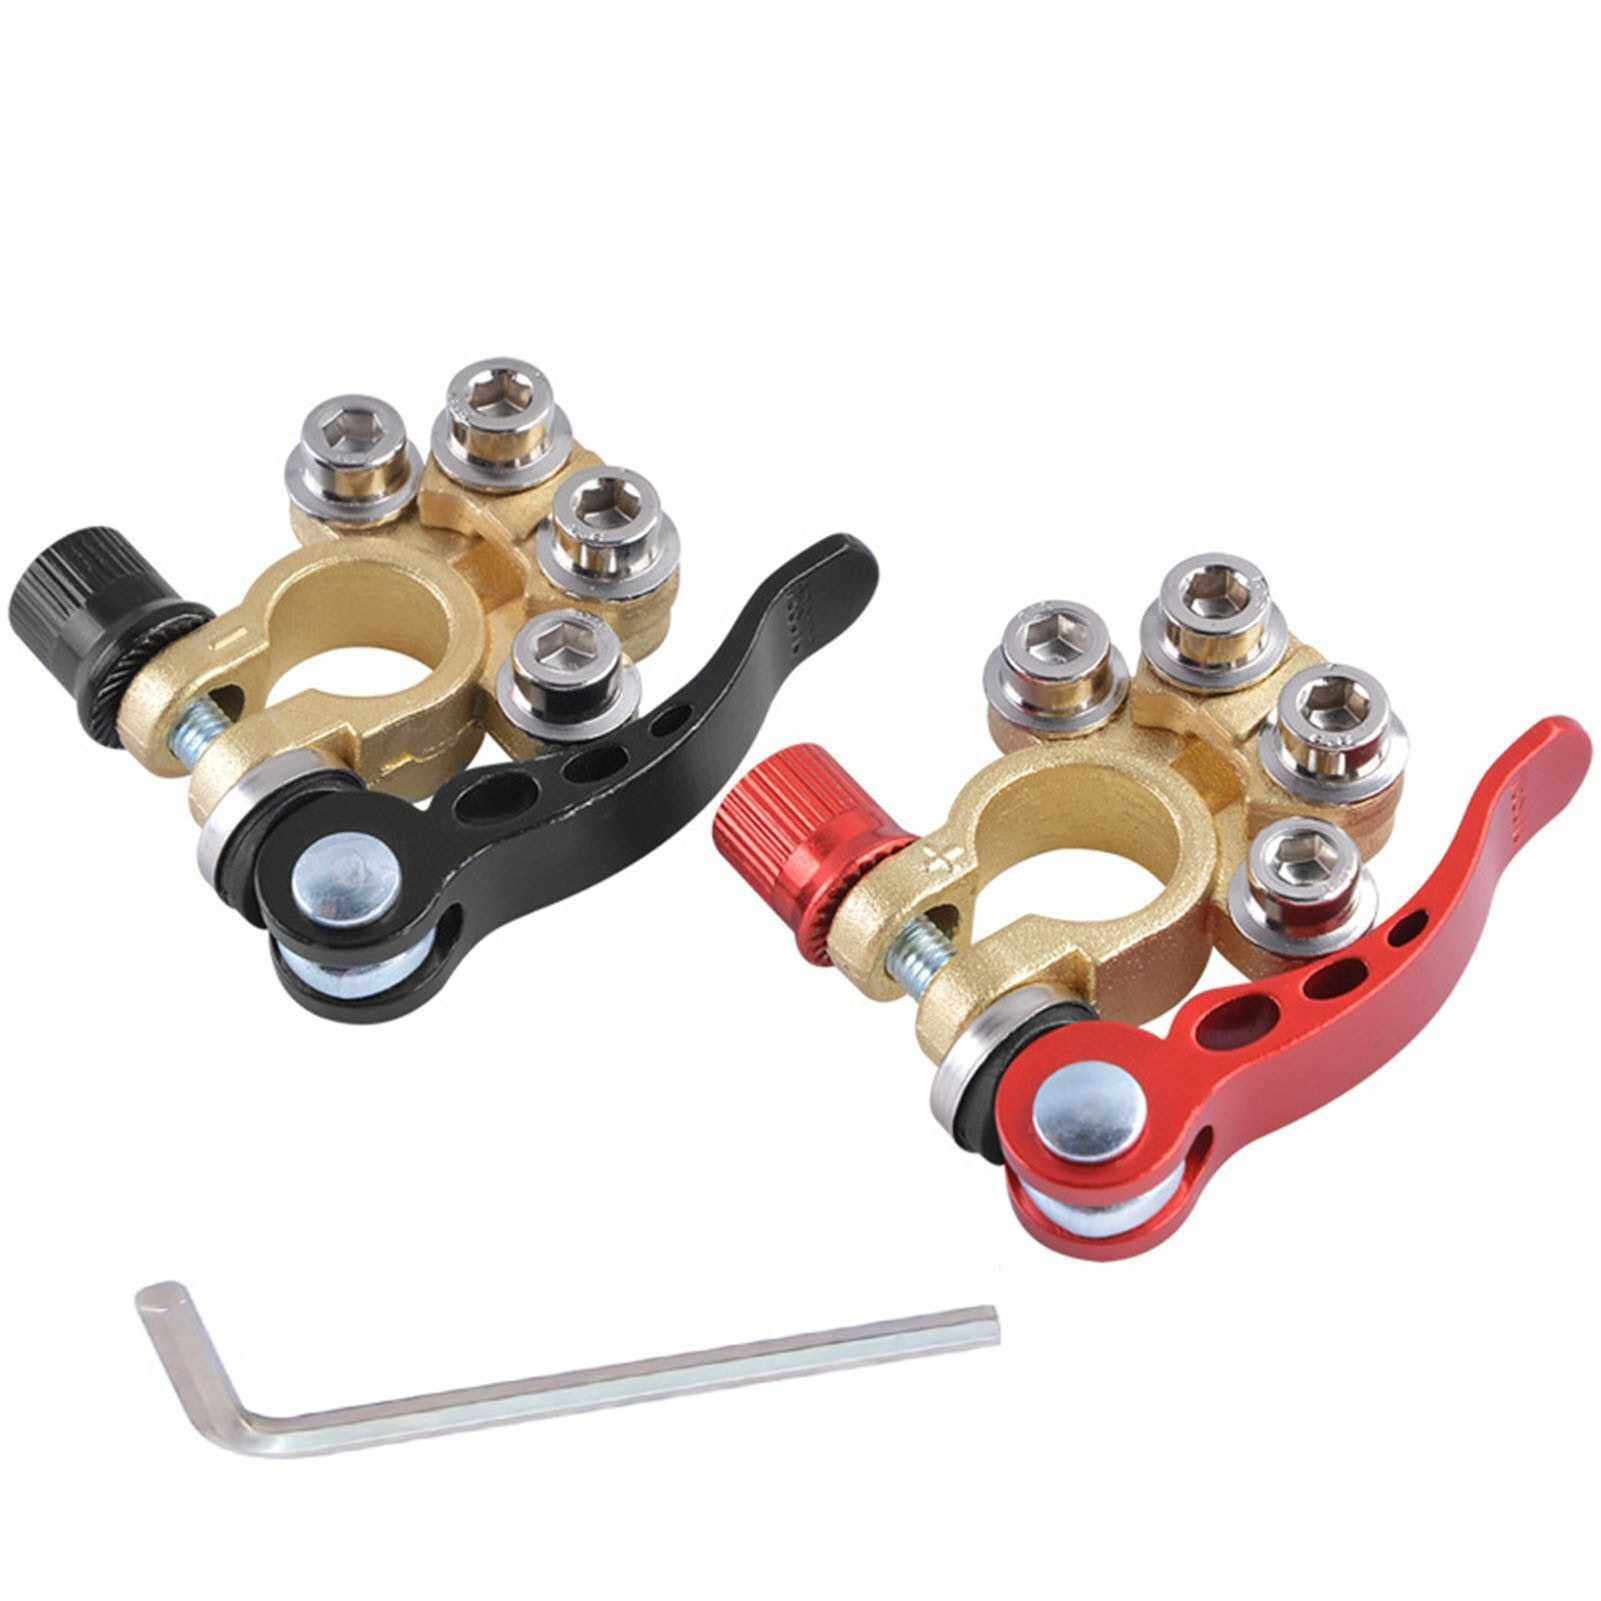 1 Pair Brass Material Automotive Car Top Post Battery Terminals Wire Cable Clamp Terminal Connectors Car Accessories (Standard)